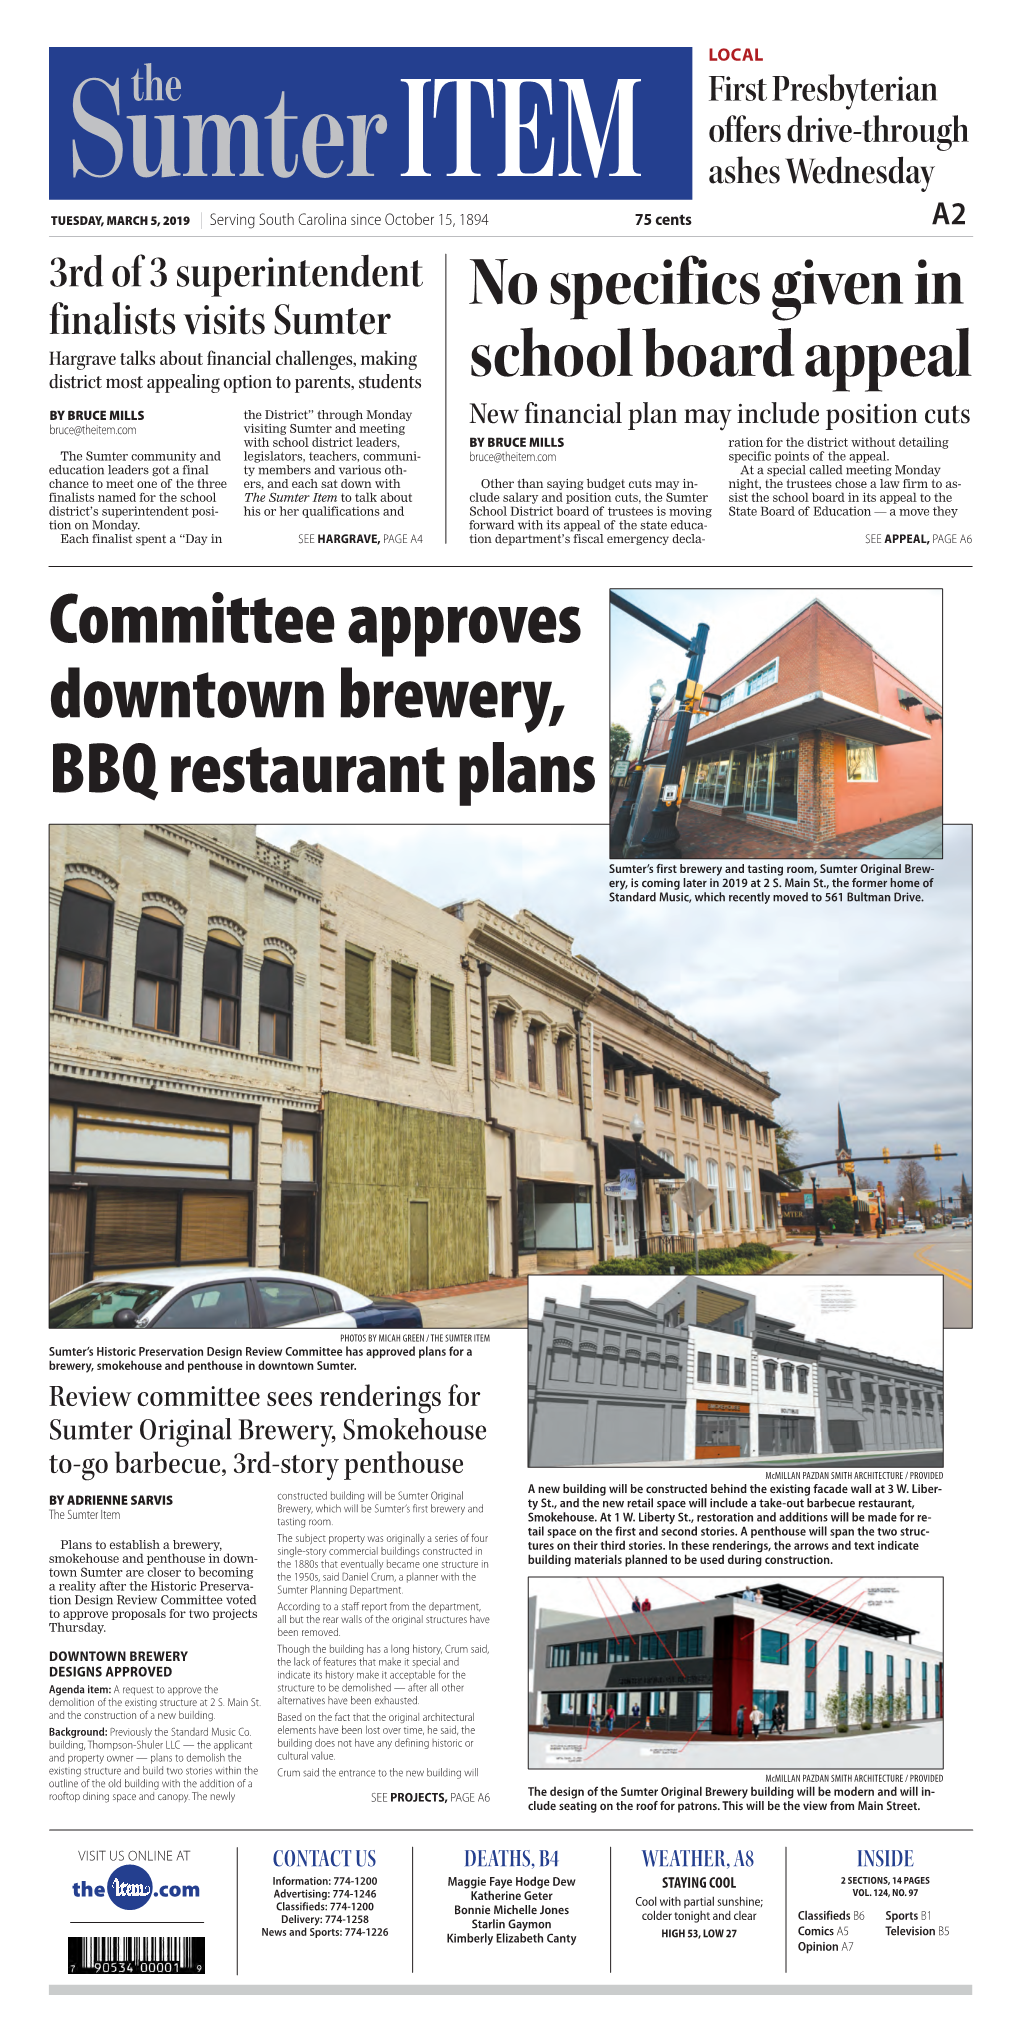 Committee Approves Downtown Brewery, BBQ Restaurant Plans